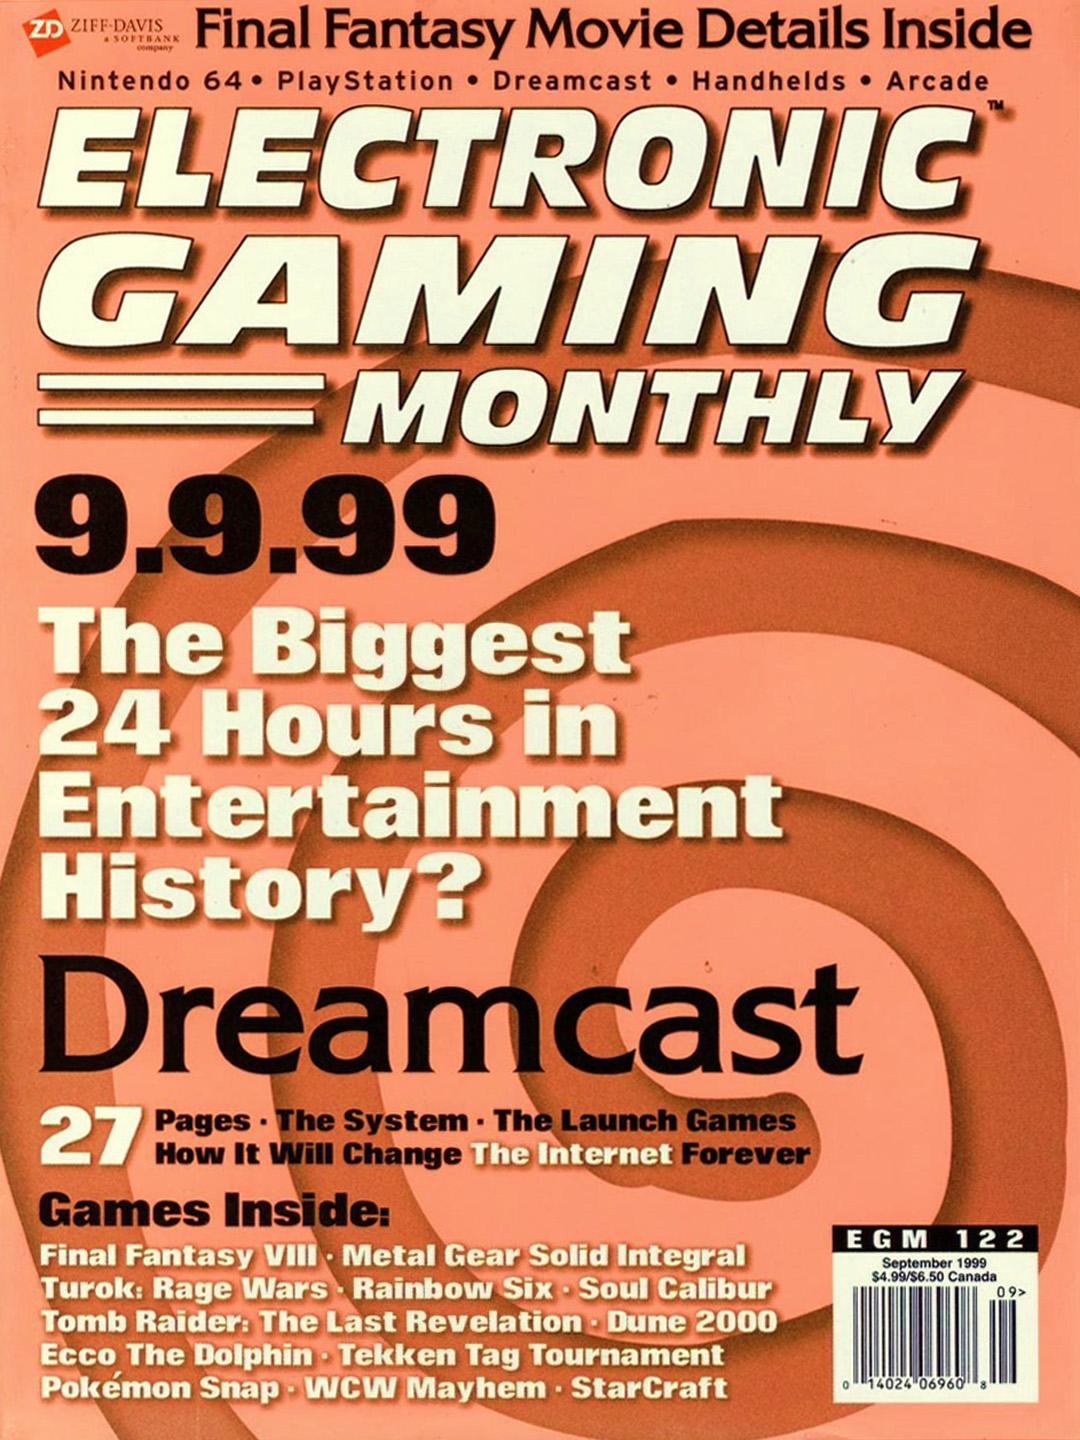 magazine-electronic-gaming-monthly-v12-9-of-12-dreamcast-1999_9-page-1.jpg